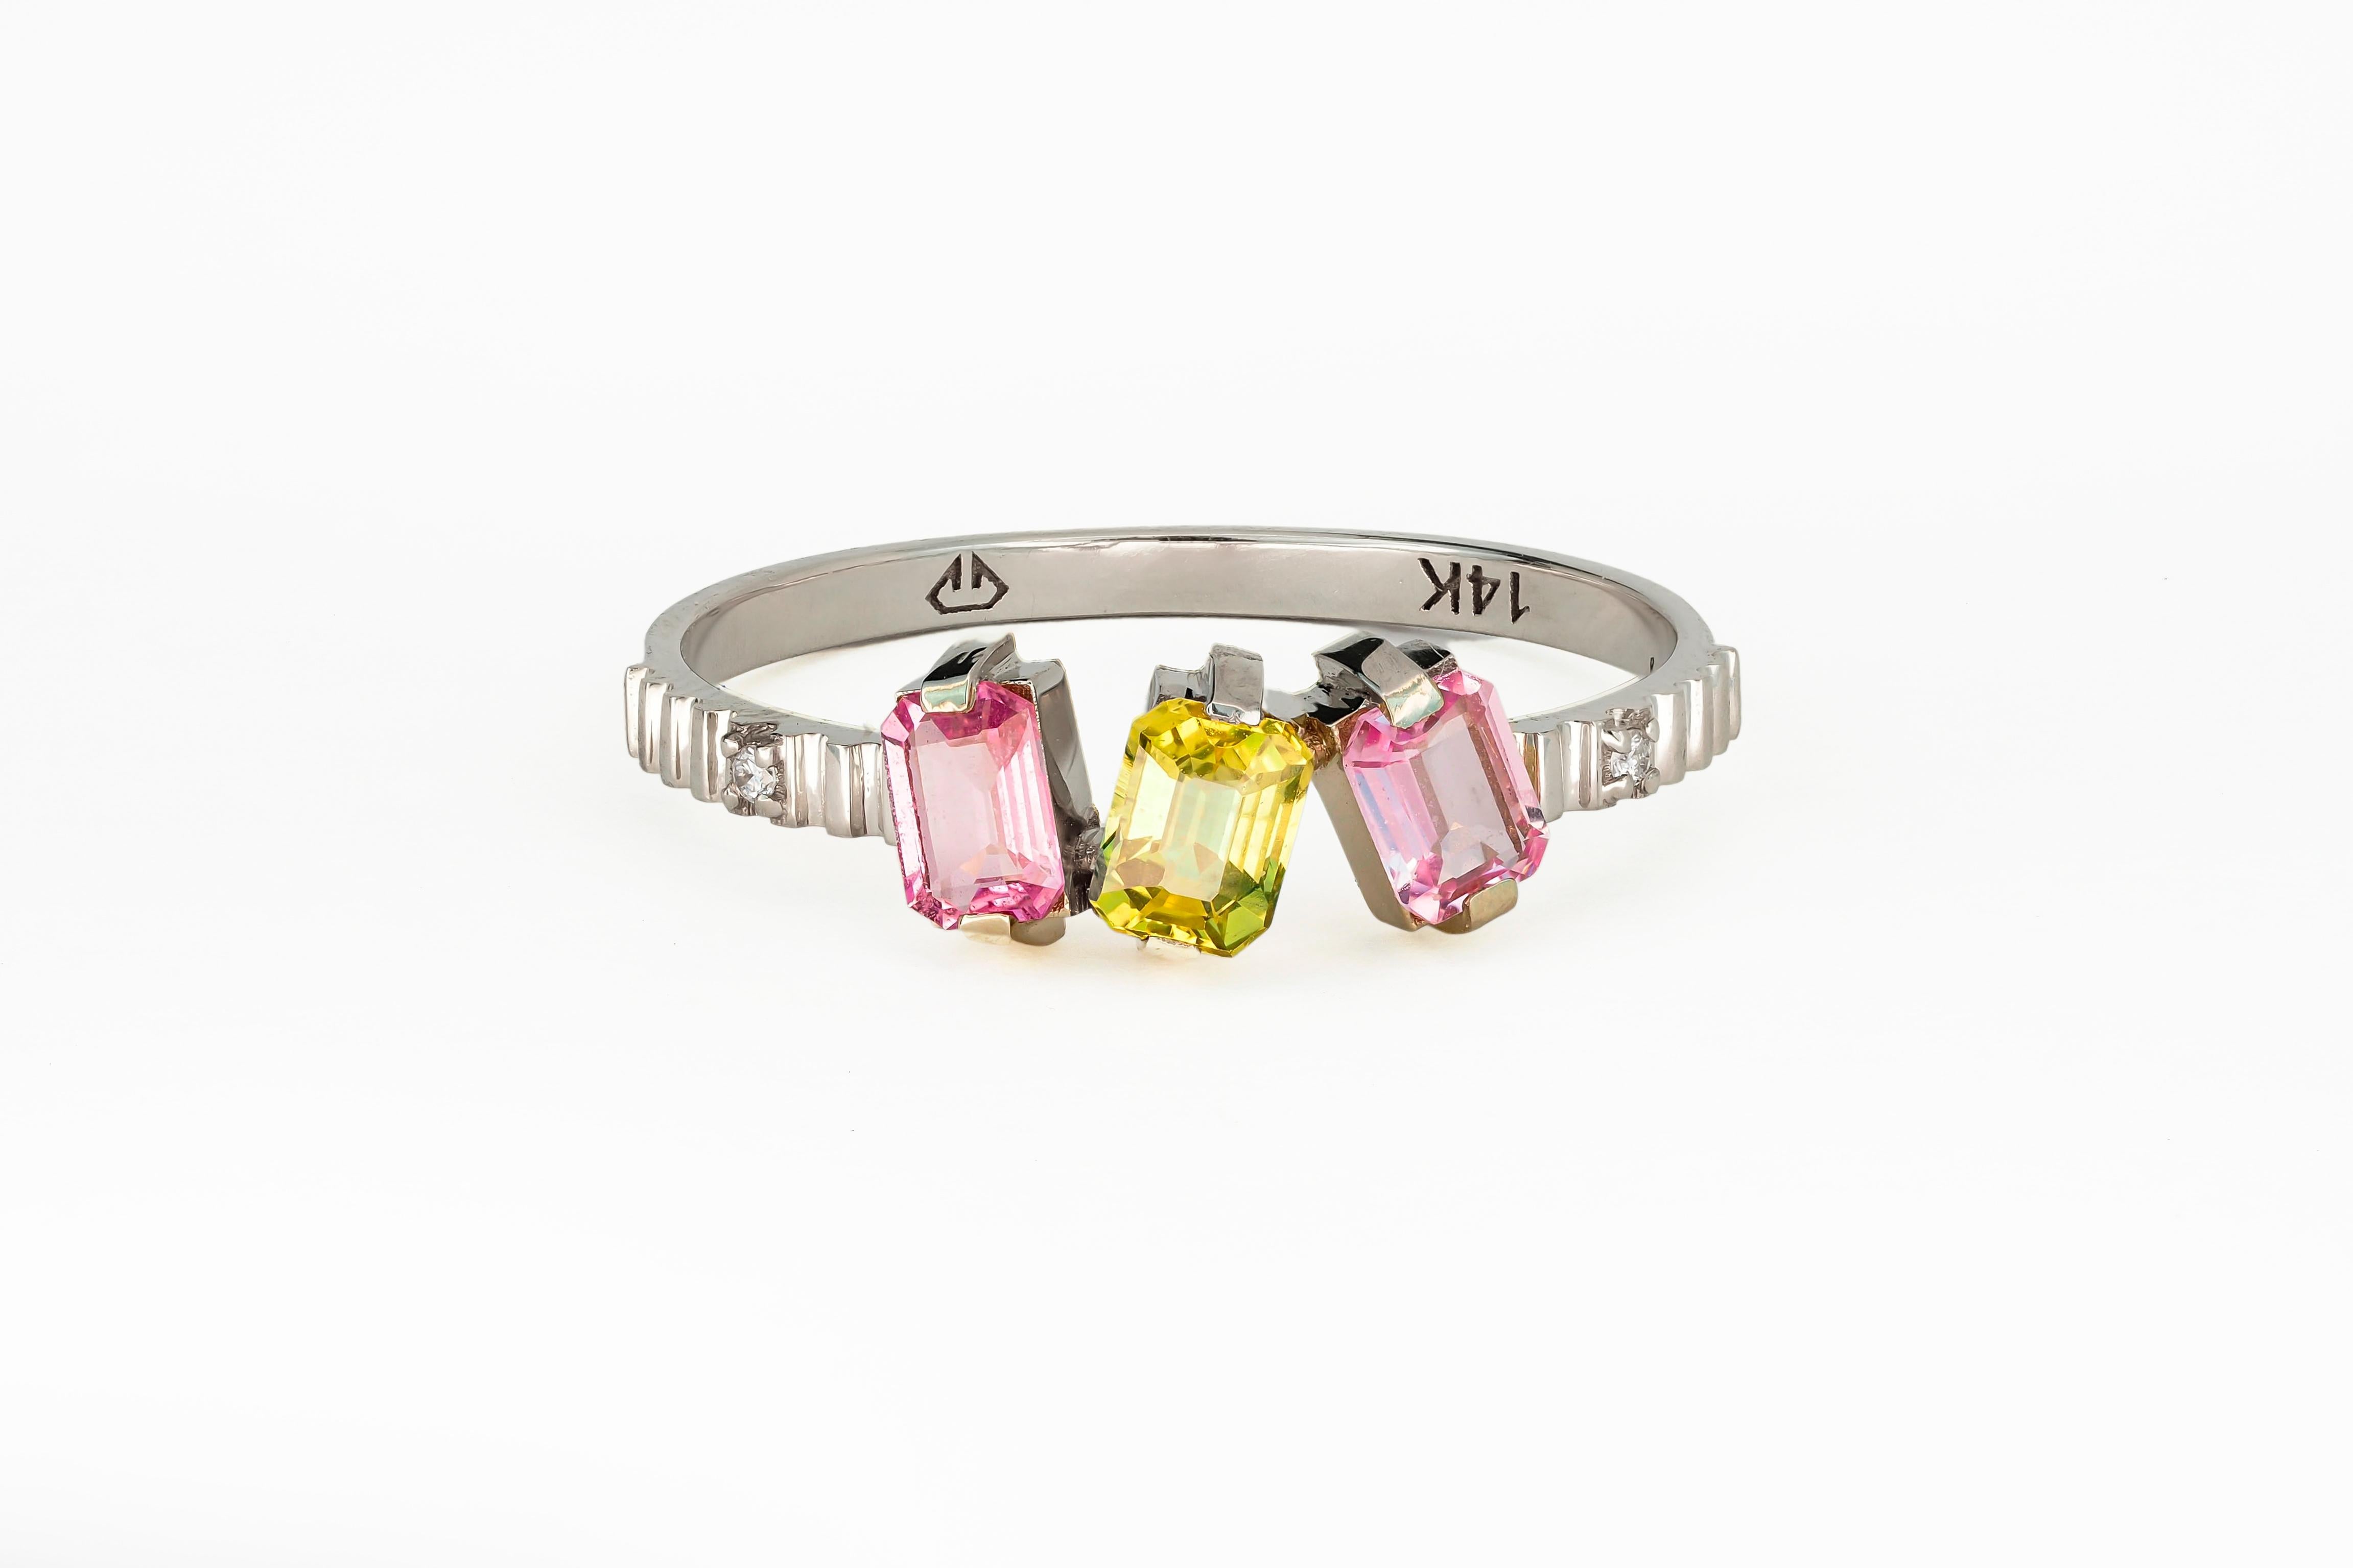 Pink and yellow sapphire gold ring. 

Baguette sapphires and diamonds ring
Weight: 1.65 g. depends from size.
Metal: 14 karat gold

Central stone: Sapphires - 3 pieces
Cut: Baguette 
Weight: aprx 0.45 ct (3x0.15ct)
Color: pink  and yellow
Clarity: